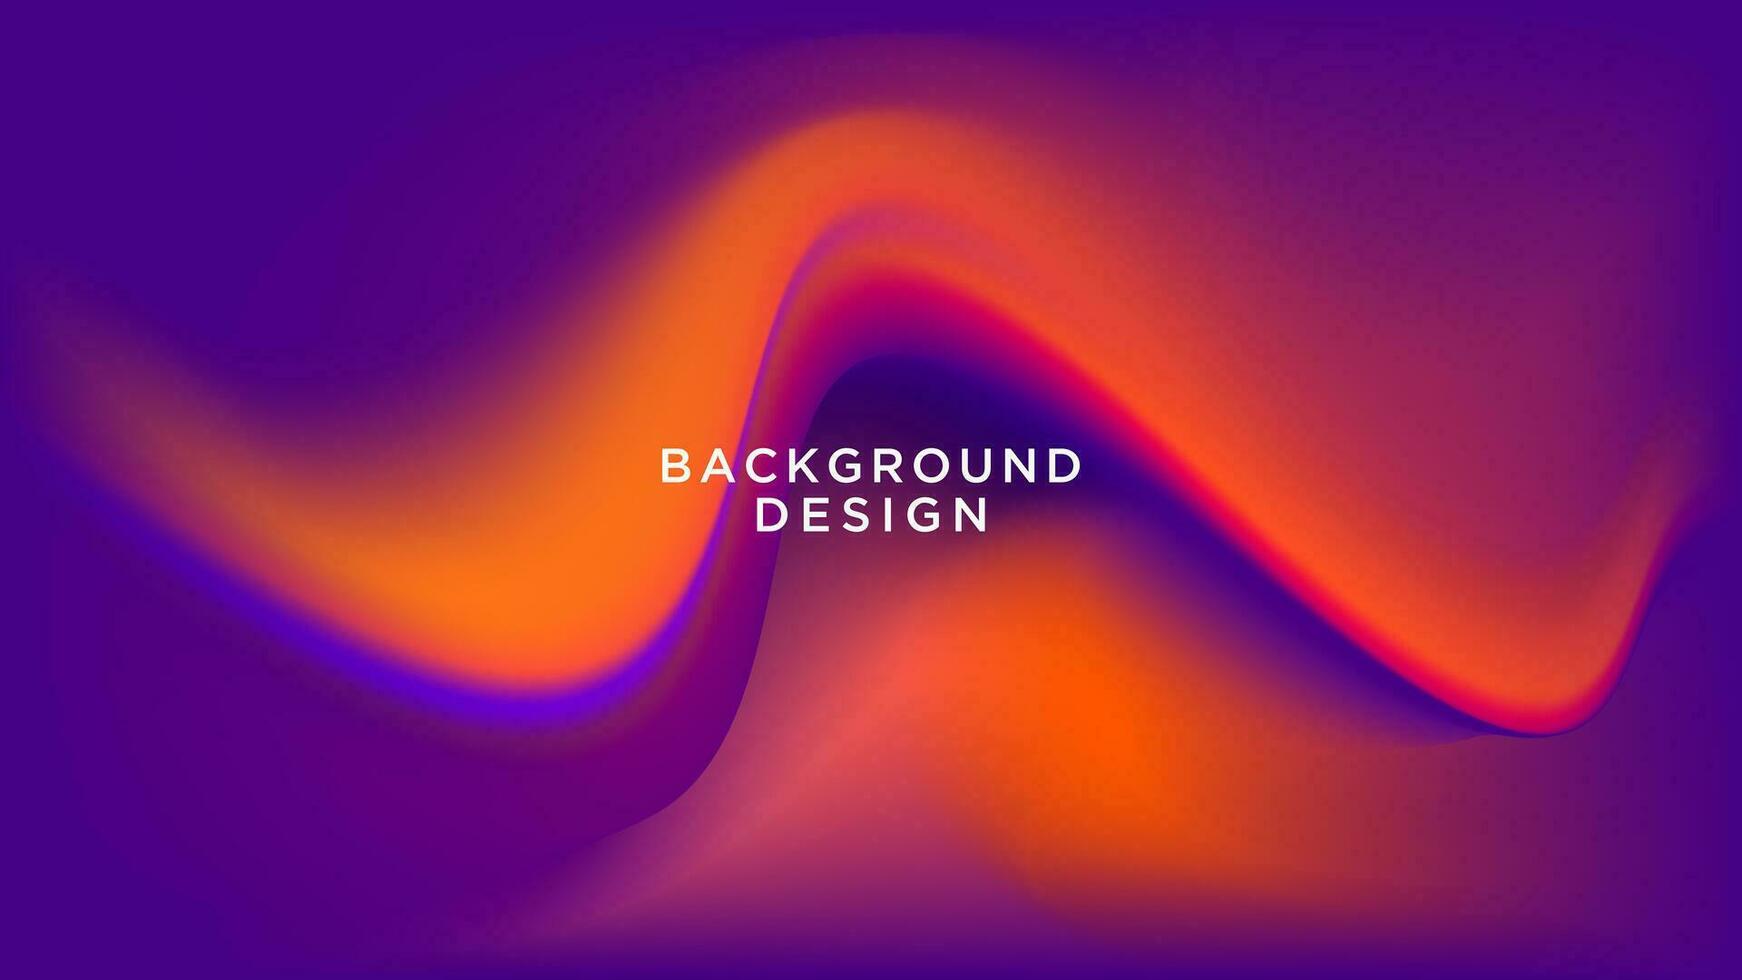 ABSTRACT BACKGROUND ELEGANT GRADIENT MNGE SMOOTH COLOR DESIGN VECTOR TEMPLATE GOOD FOR MODERN WEBSESH PURPLE ORAITE, WALLPAPER, COVER DESIGN